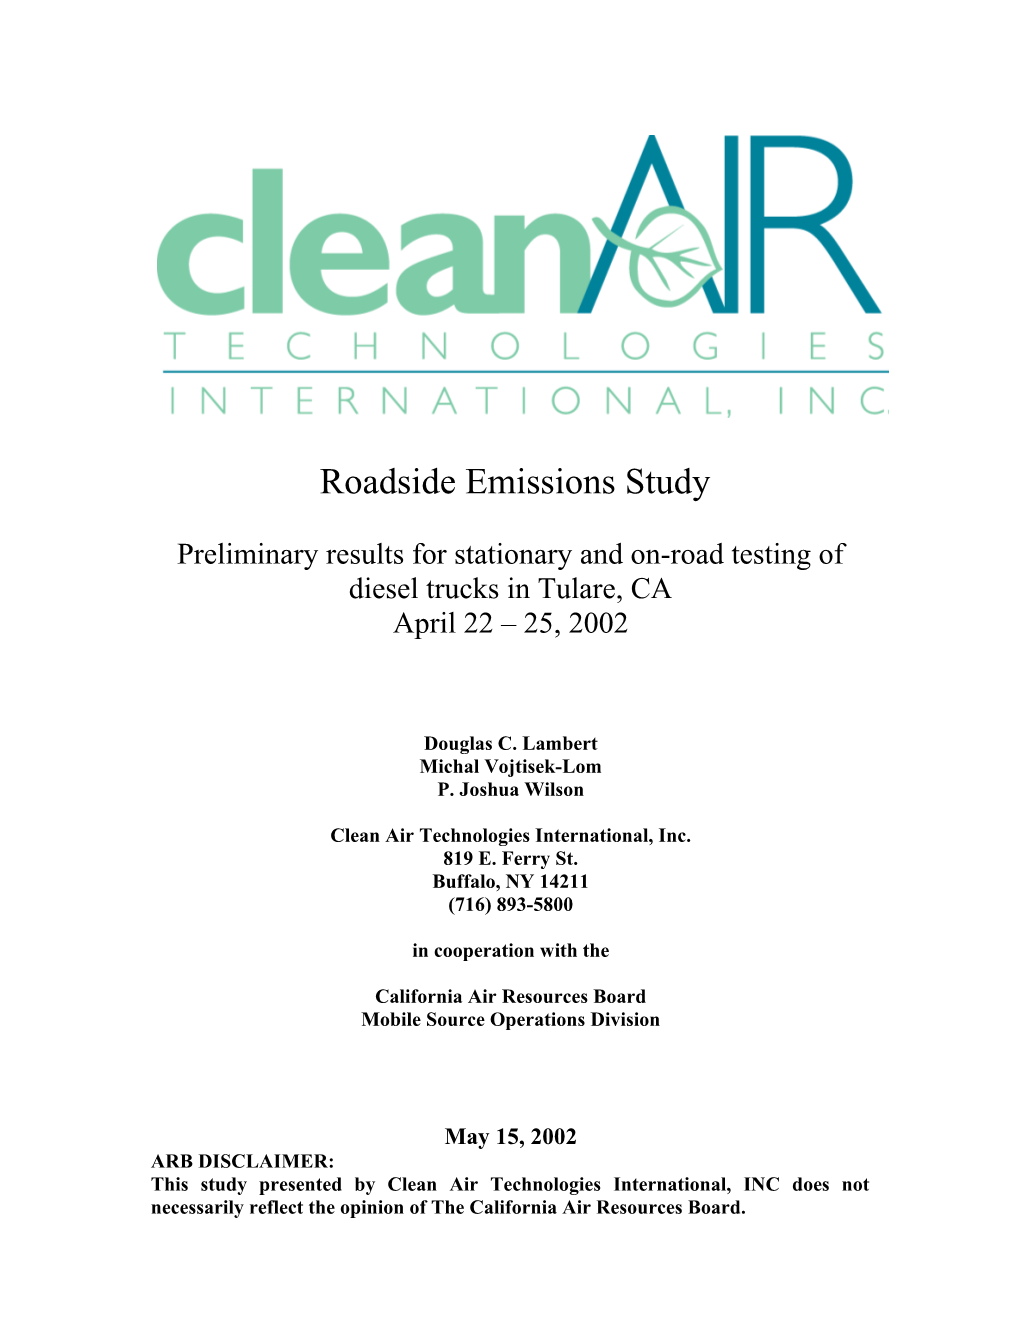 Preliminary Results for Stationary and On-Road Testing of Diesel Trucks in Tulare, CA